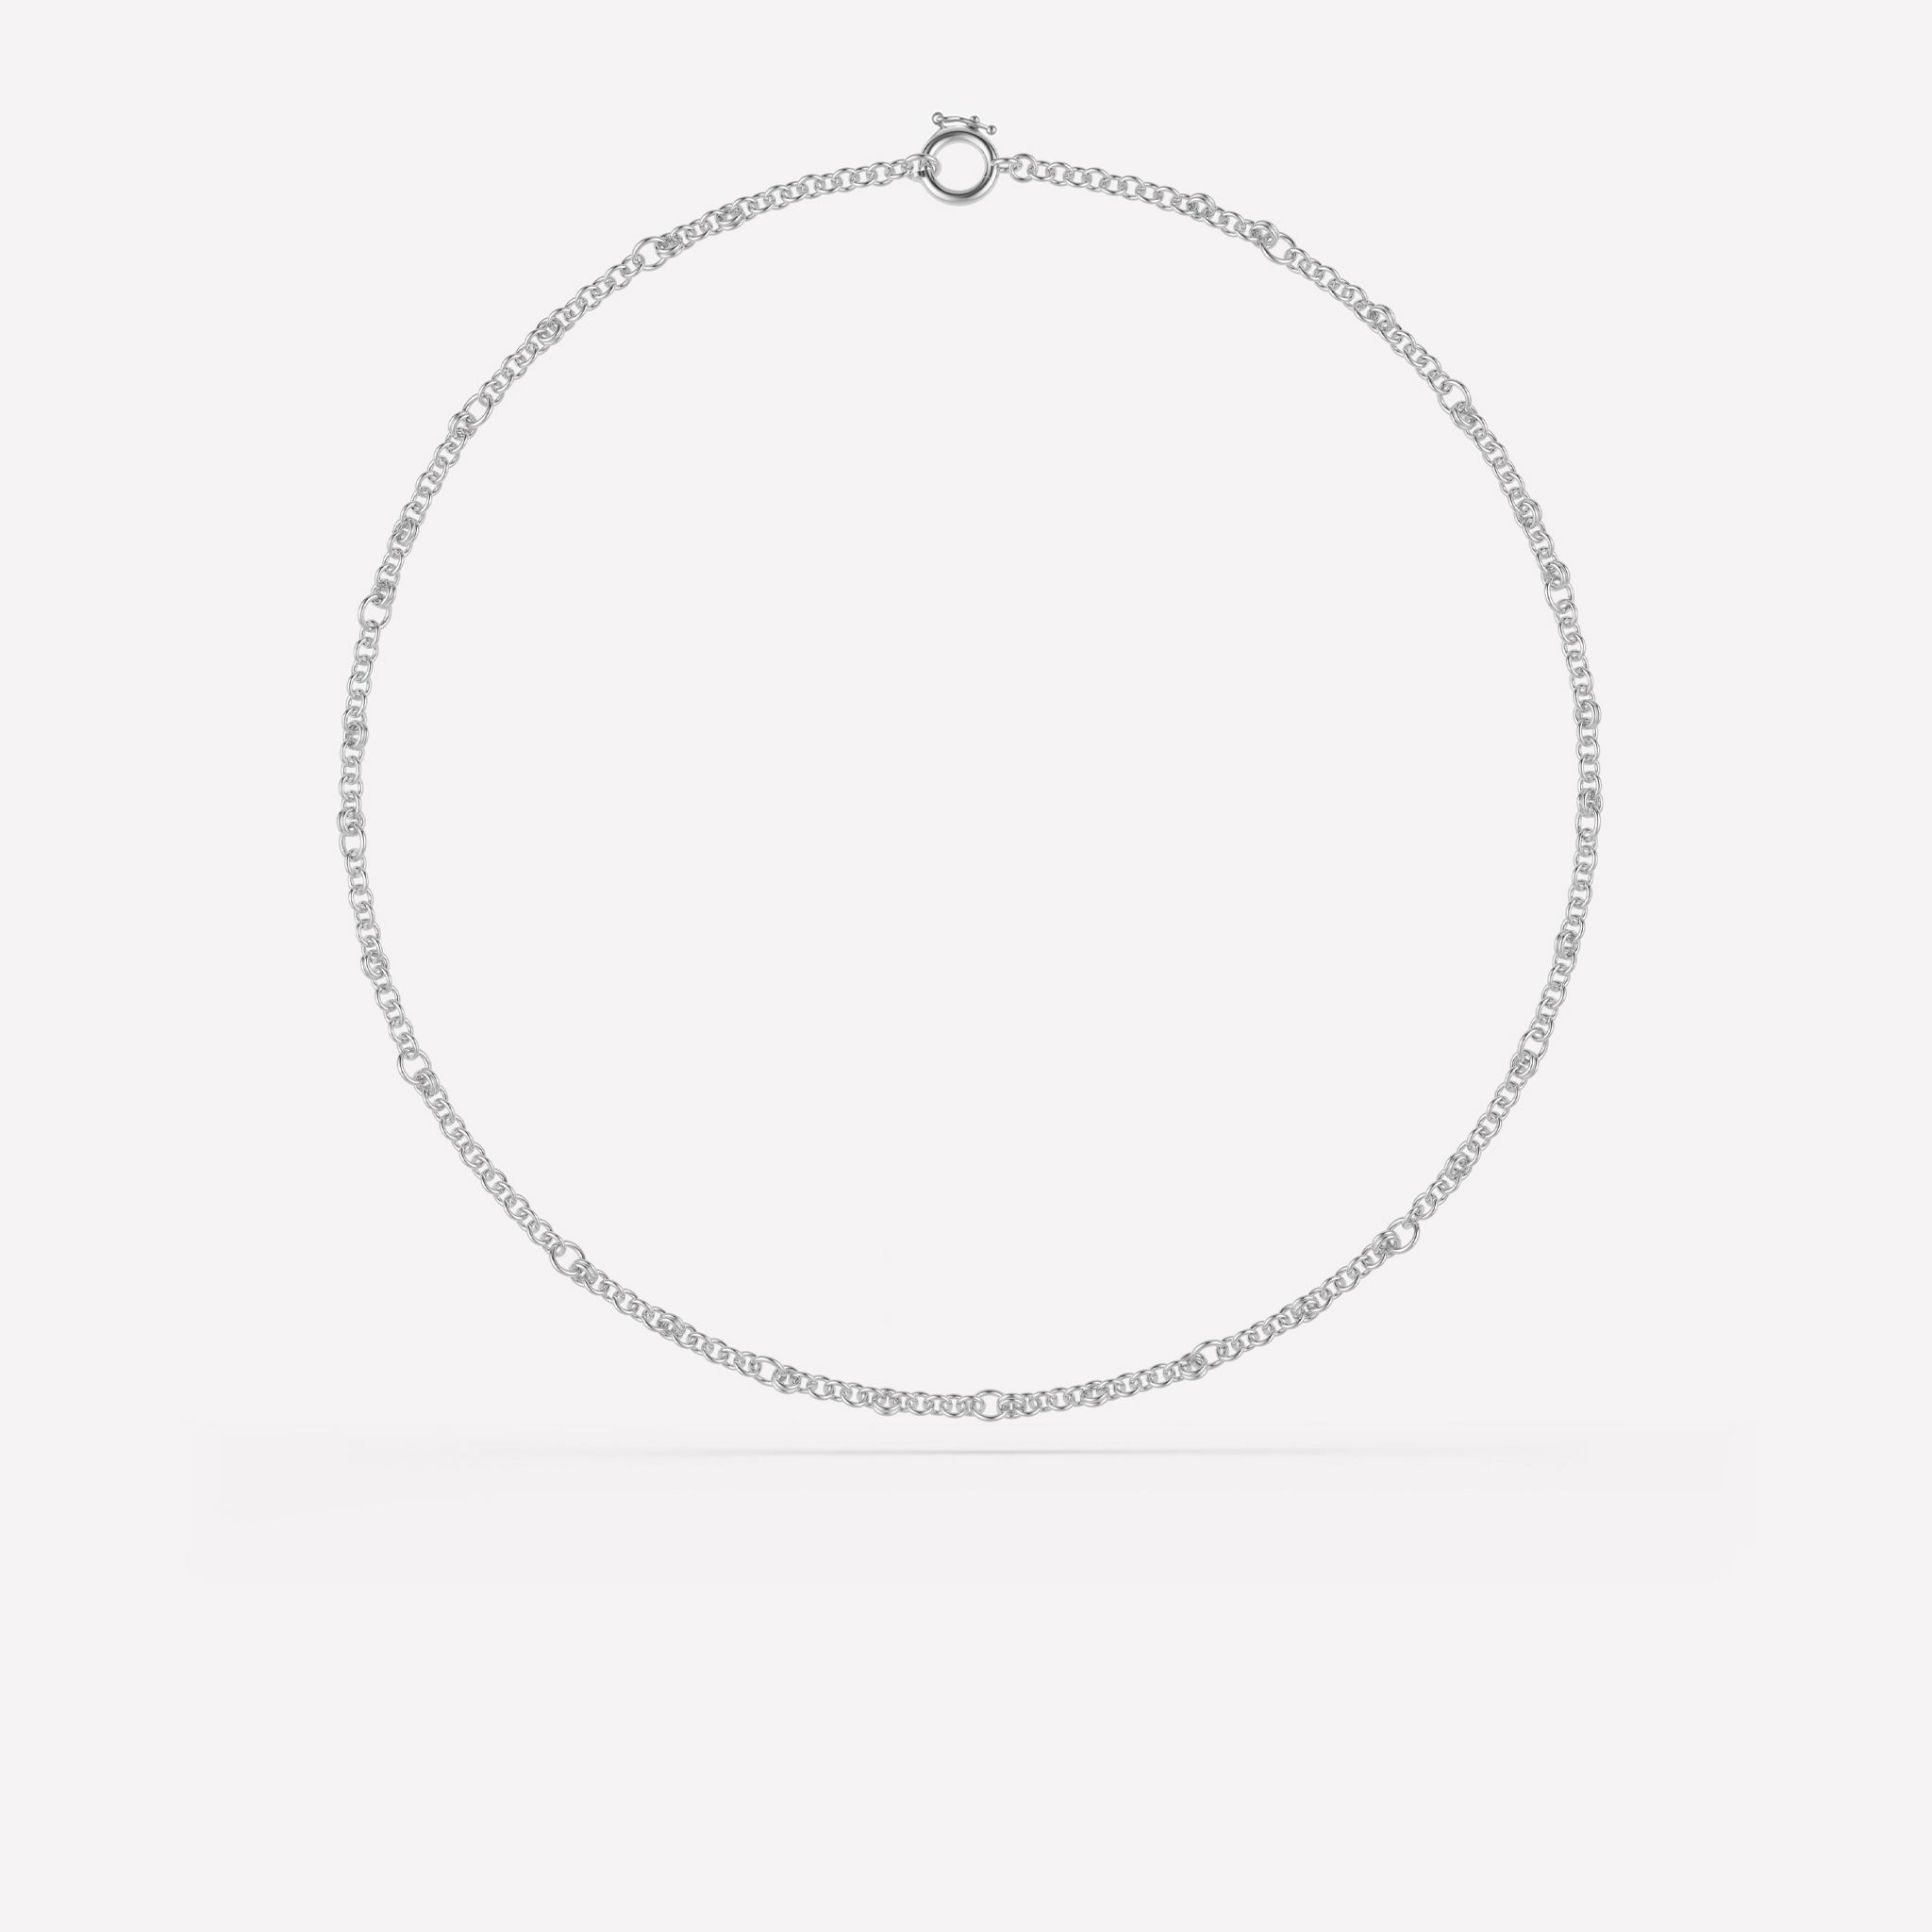 Gravity Chain Necklace - Gravity Chain Silver / 14 Inches